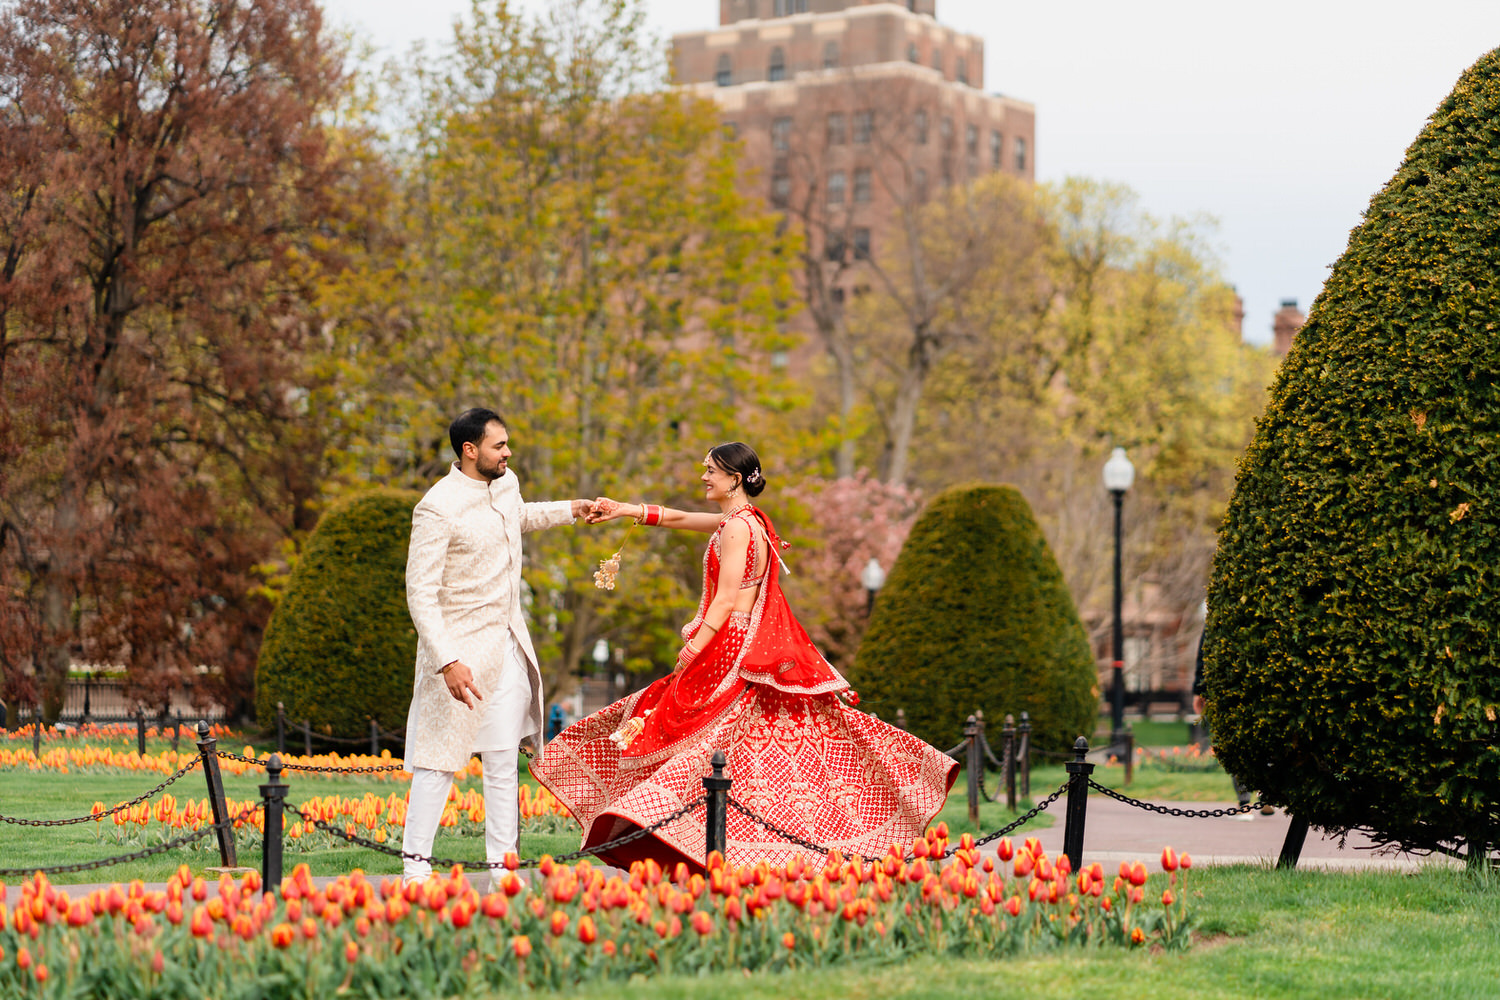 a man and woman dressed in traditional indian garb dancing in a park.